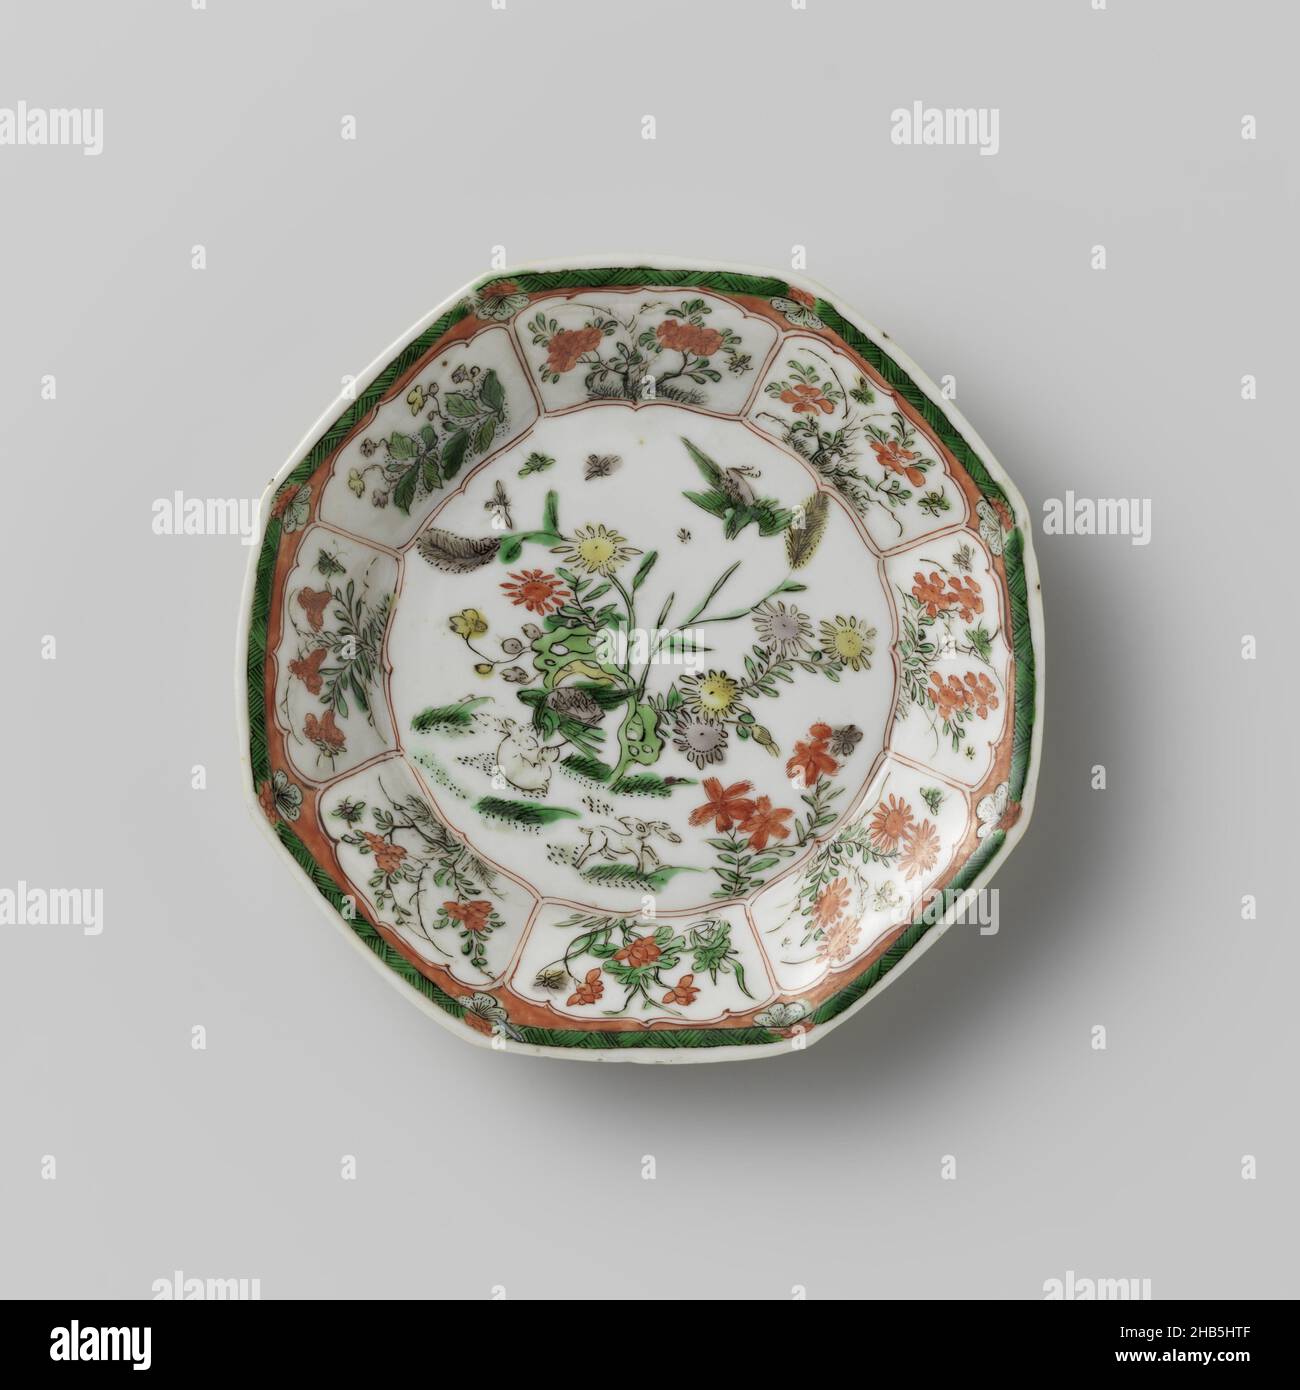 Octagonal saucer with light brown, animals and flower sprays, Octagonal saucer of porcelain, partially covered with café-au-lait, painted in underglaze blue and on the glaze red, green, yellow, eggplant and black. On the flat, two hares and two birds near a rock with flowering plants; the wall with flower branches and butterflies in a box decoration; the rim with zigzag work alternating with flowers. The exterior is covered with a café-au-lait glaze with flower branches. Marked on the underside with a character in a double circle. Famille verte with monochrome brown glaze., anonymous, China, c Stock Photo